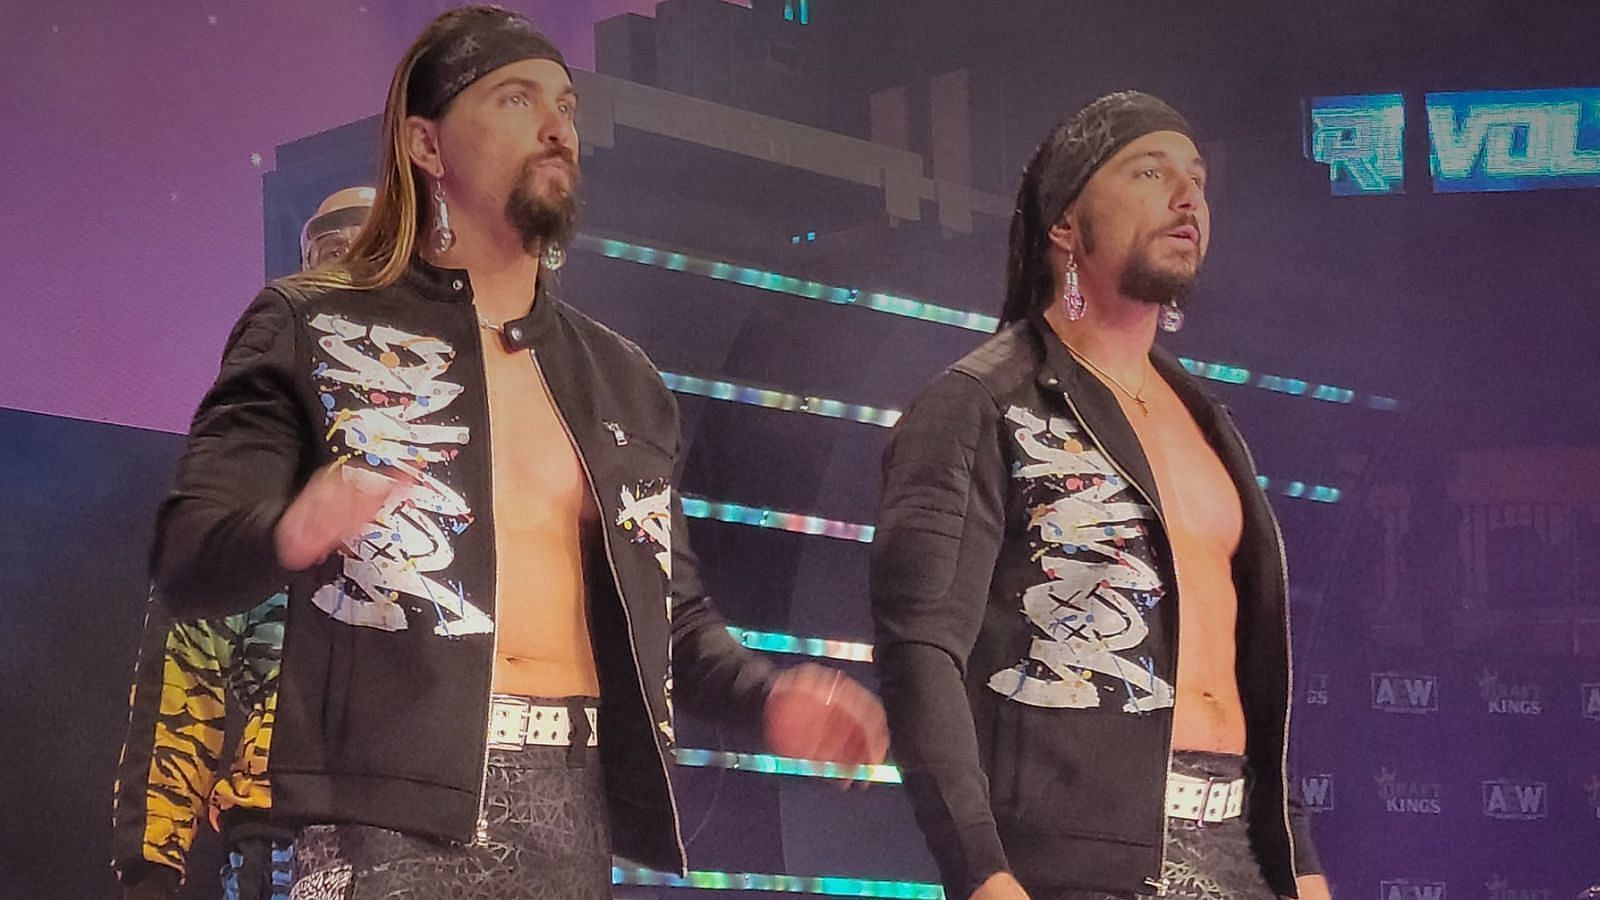 The Young Bucks are one of the top tag teams in AEW.